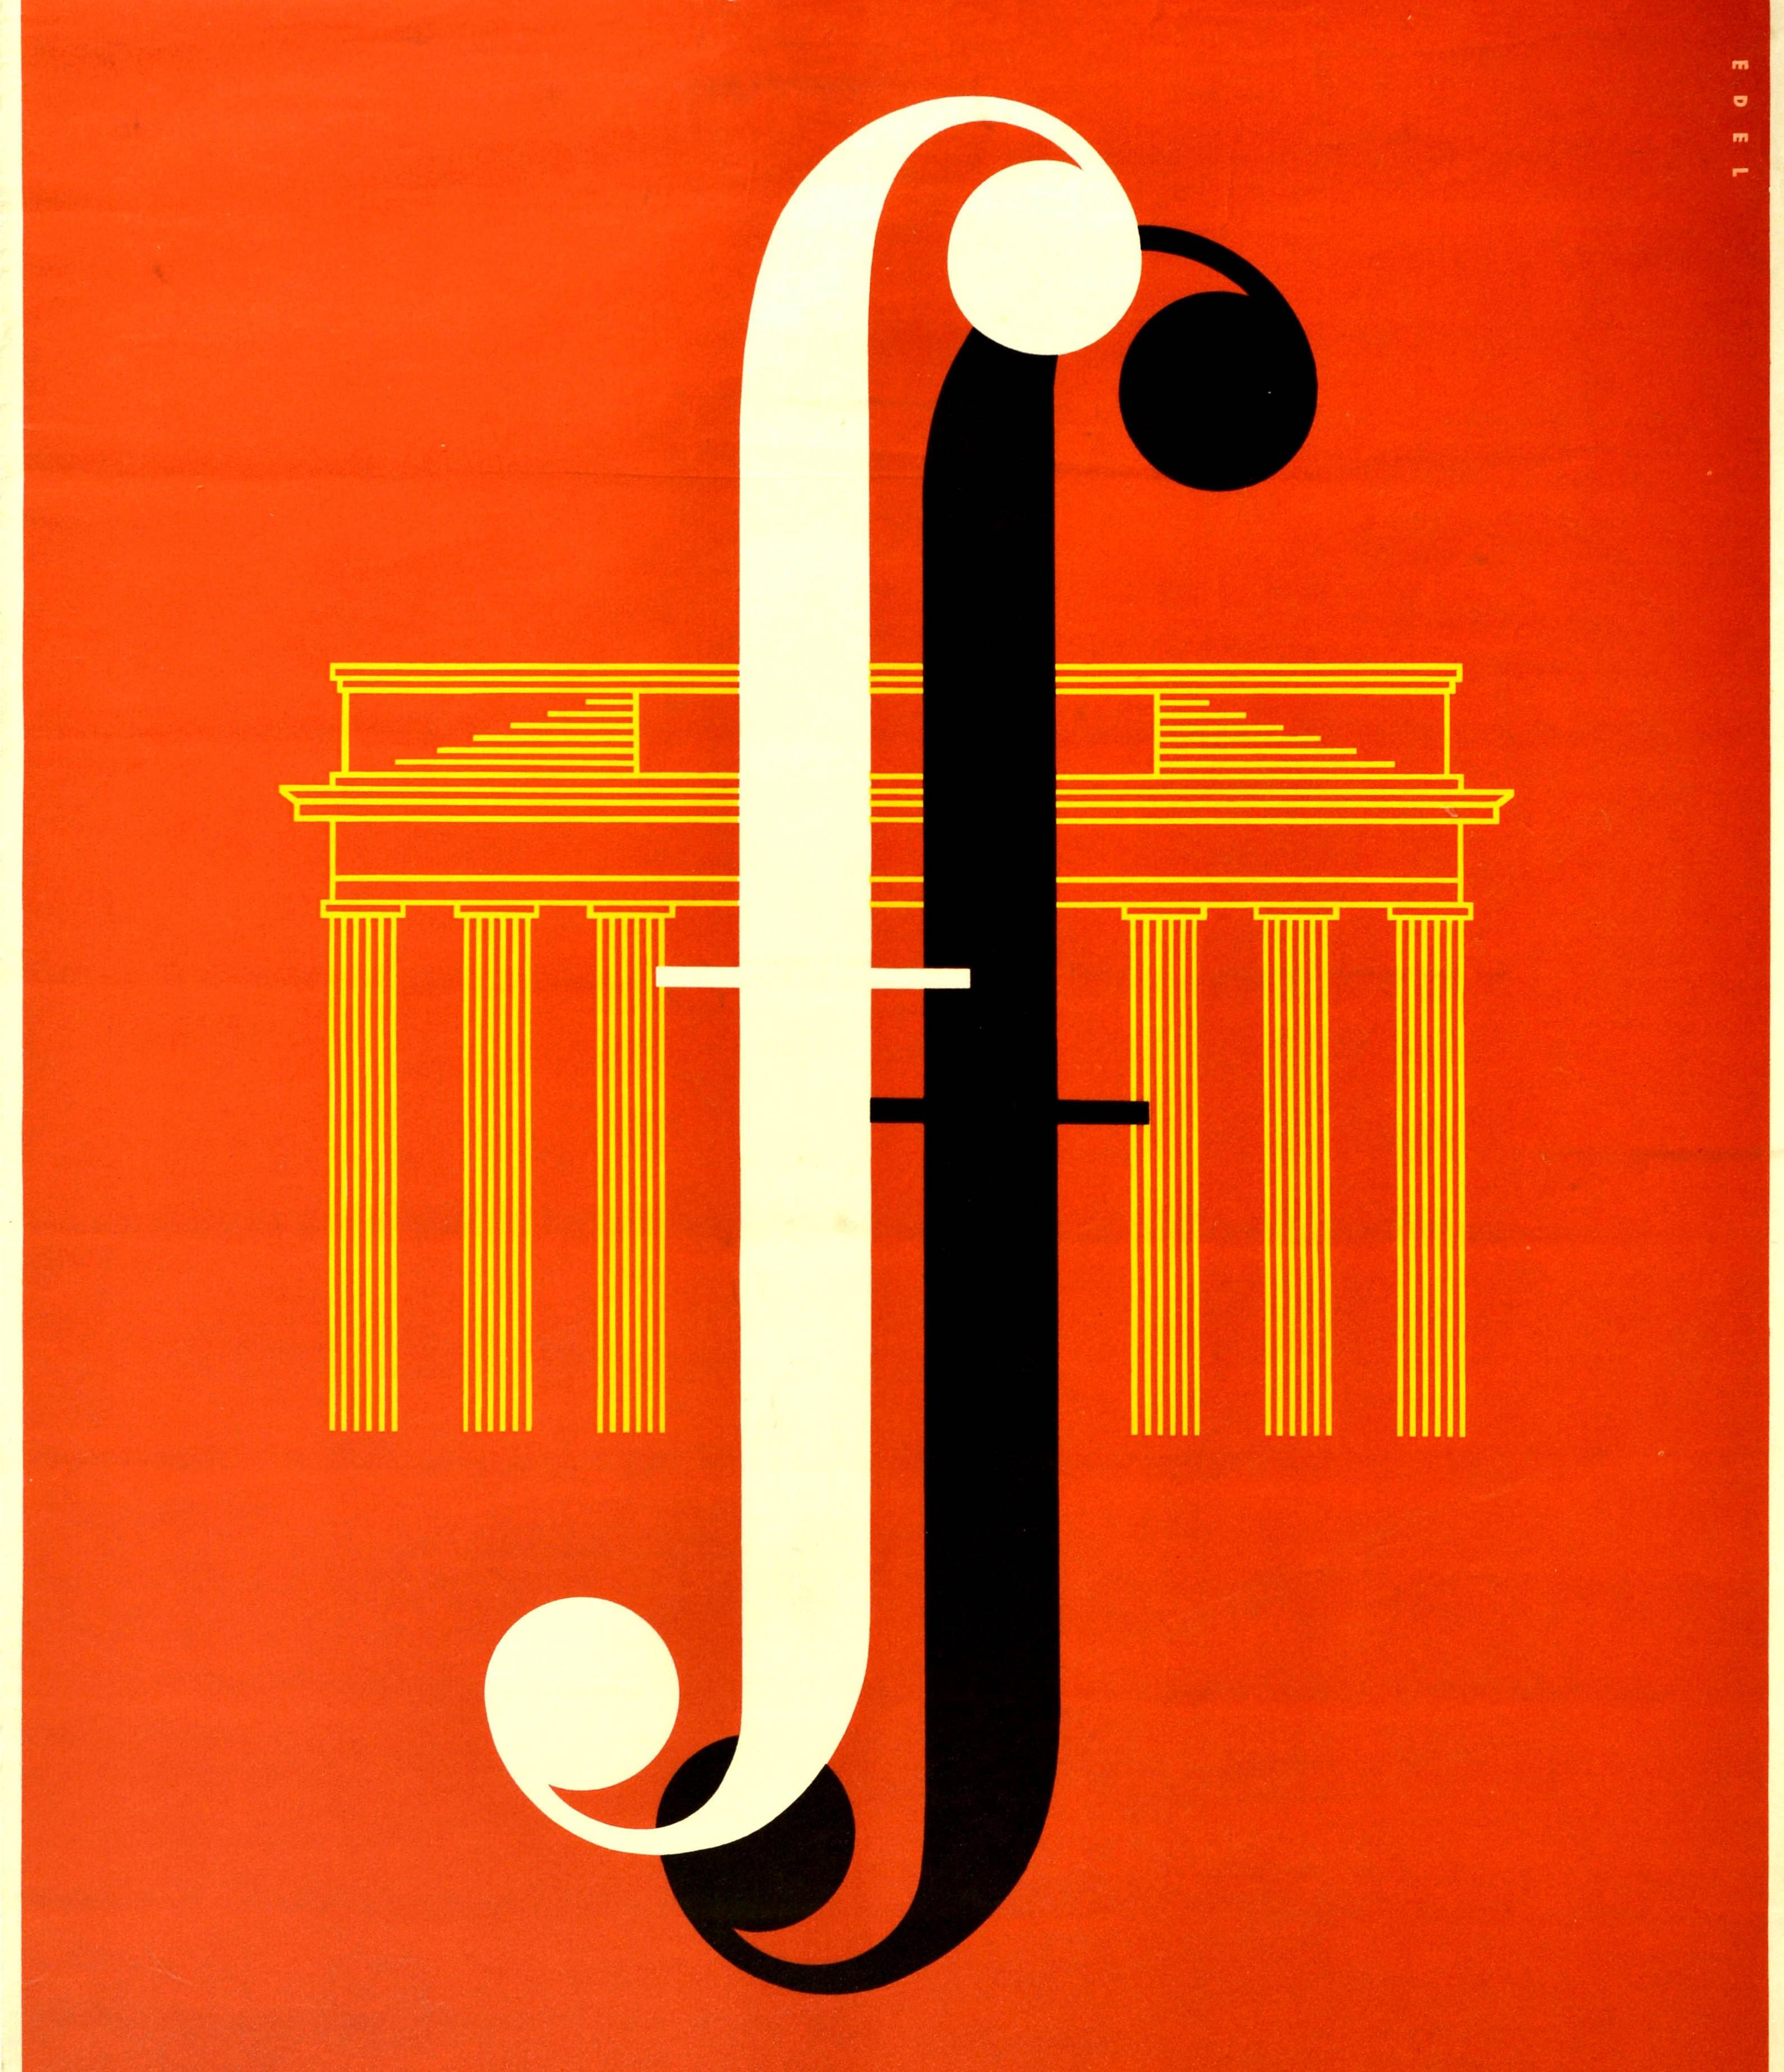 Original vintage travel poster promoting the Festival de Berlin music festival in Berlin from 17 September to 4 October 1955 featuring an elegant mid-century design of a stylised music symbol F (for forte indicating a loud dynamics on the music